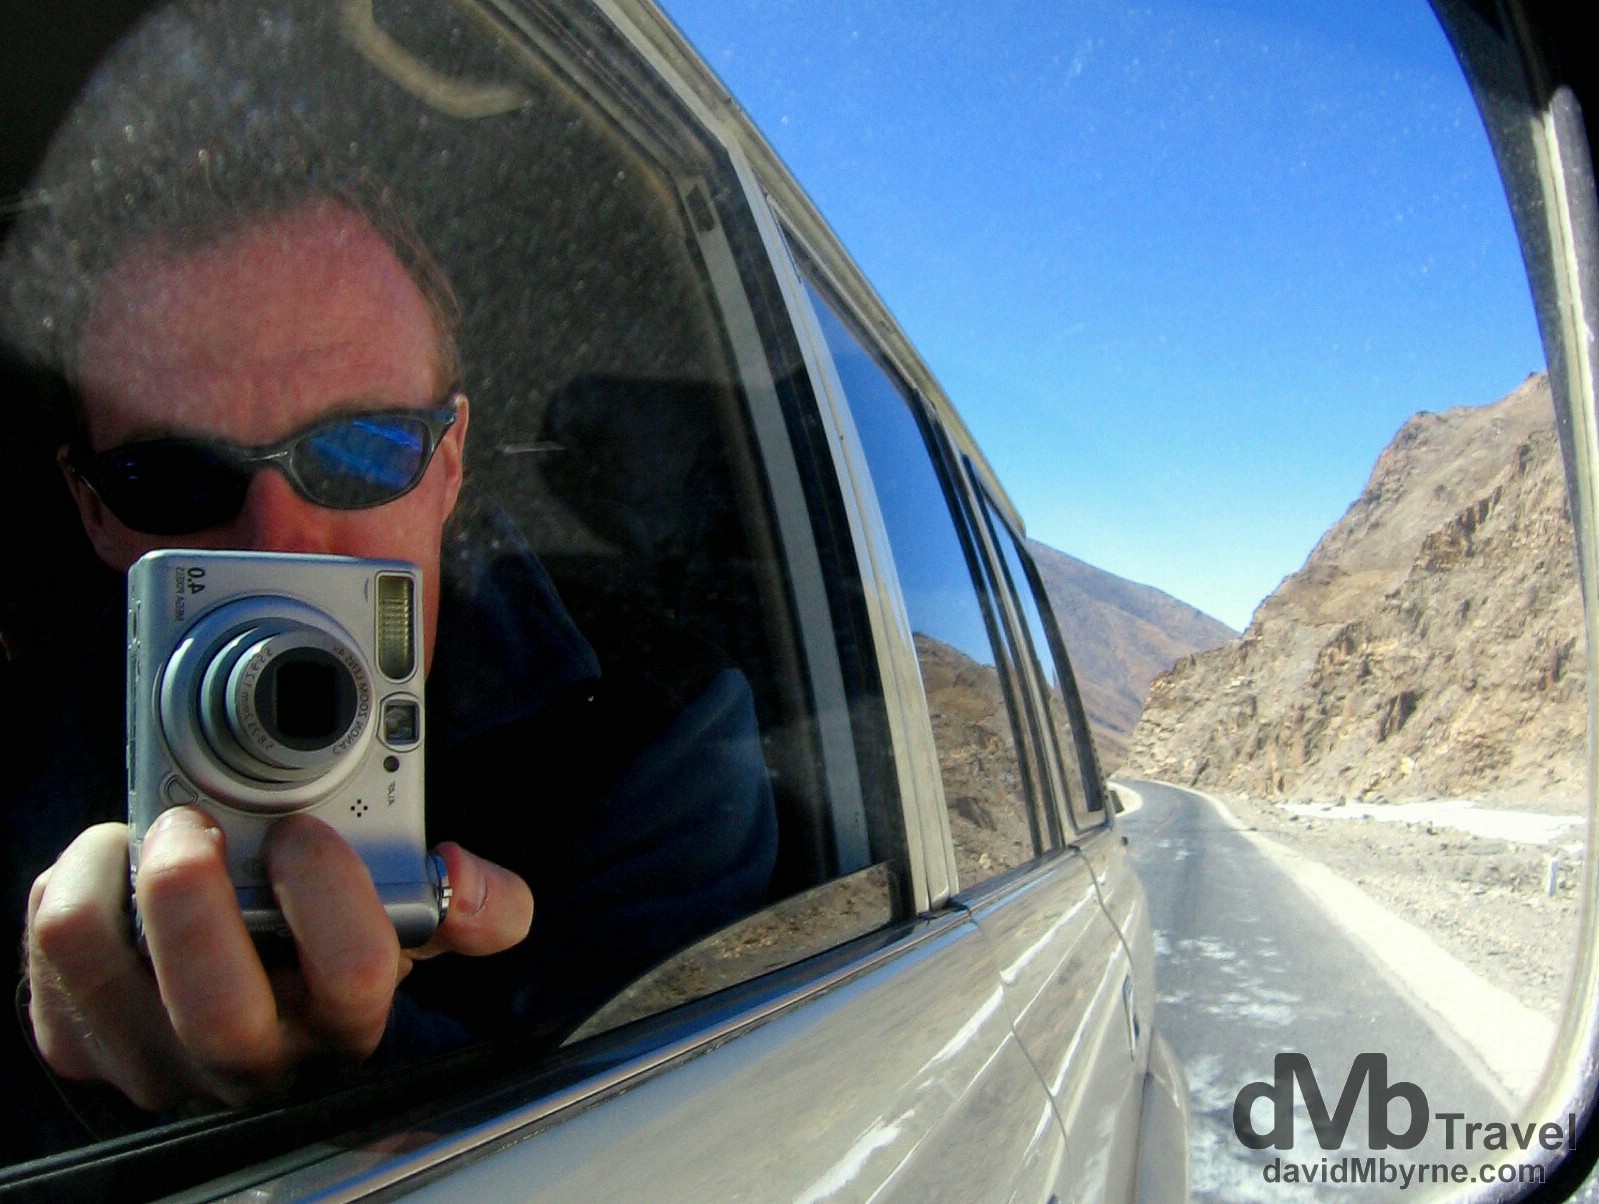 Front seat reflection selfie on the Friendship Highway, Tibet. March 2, 2008.